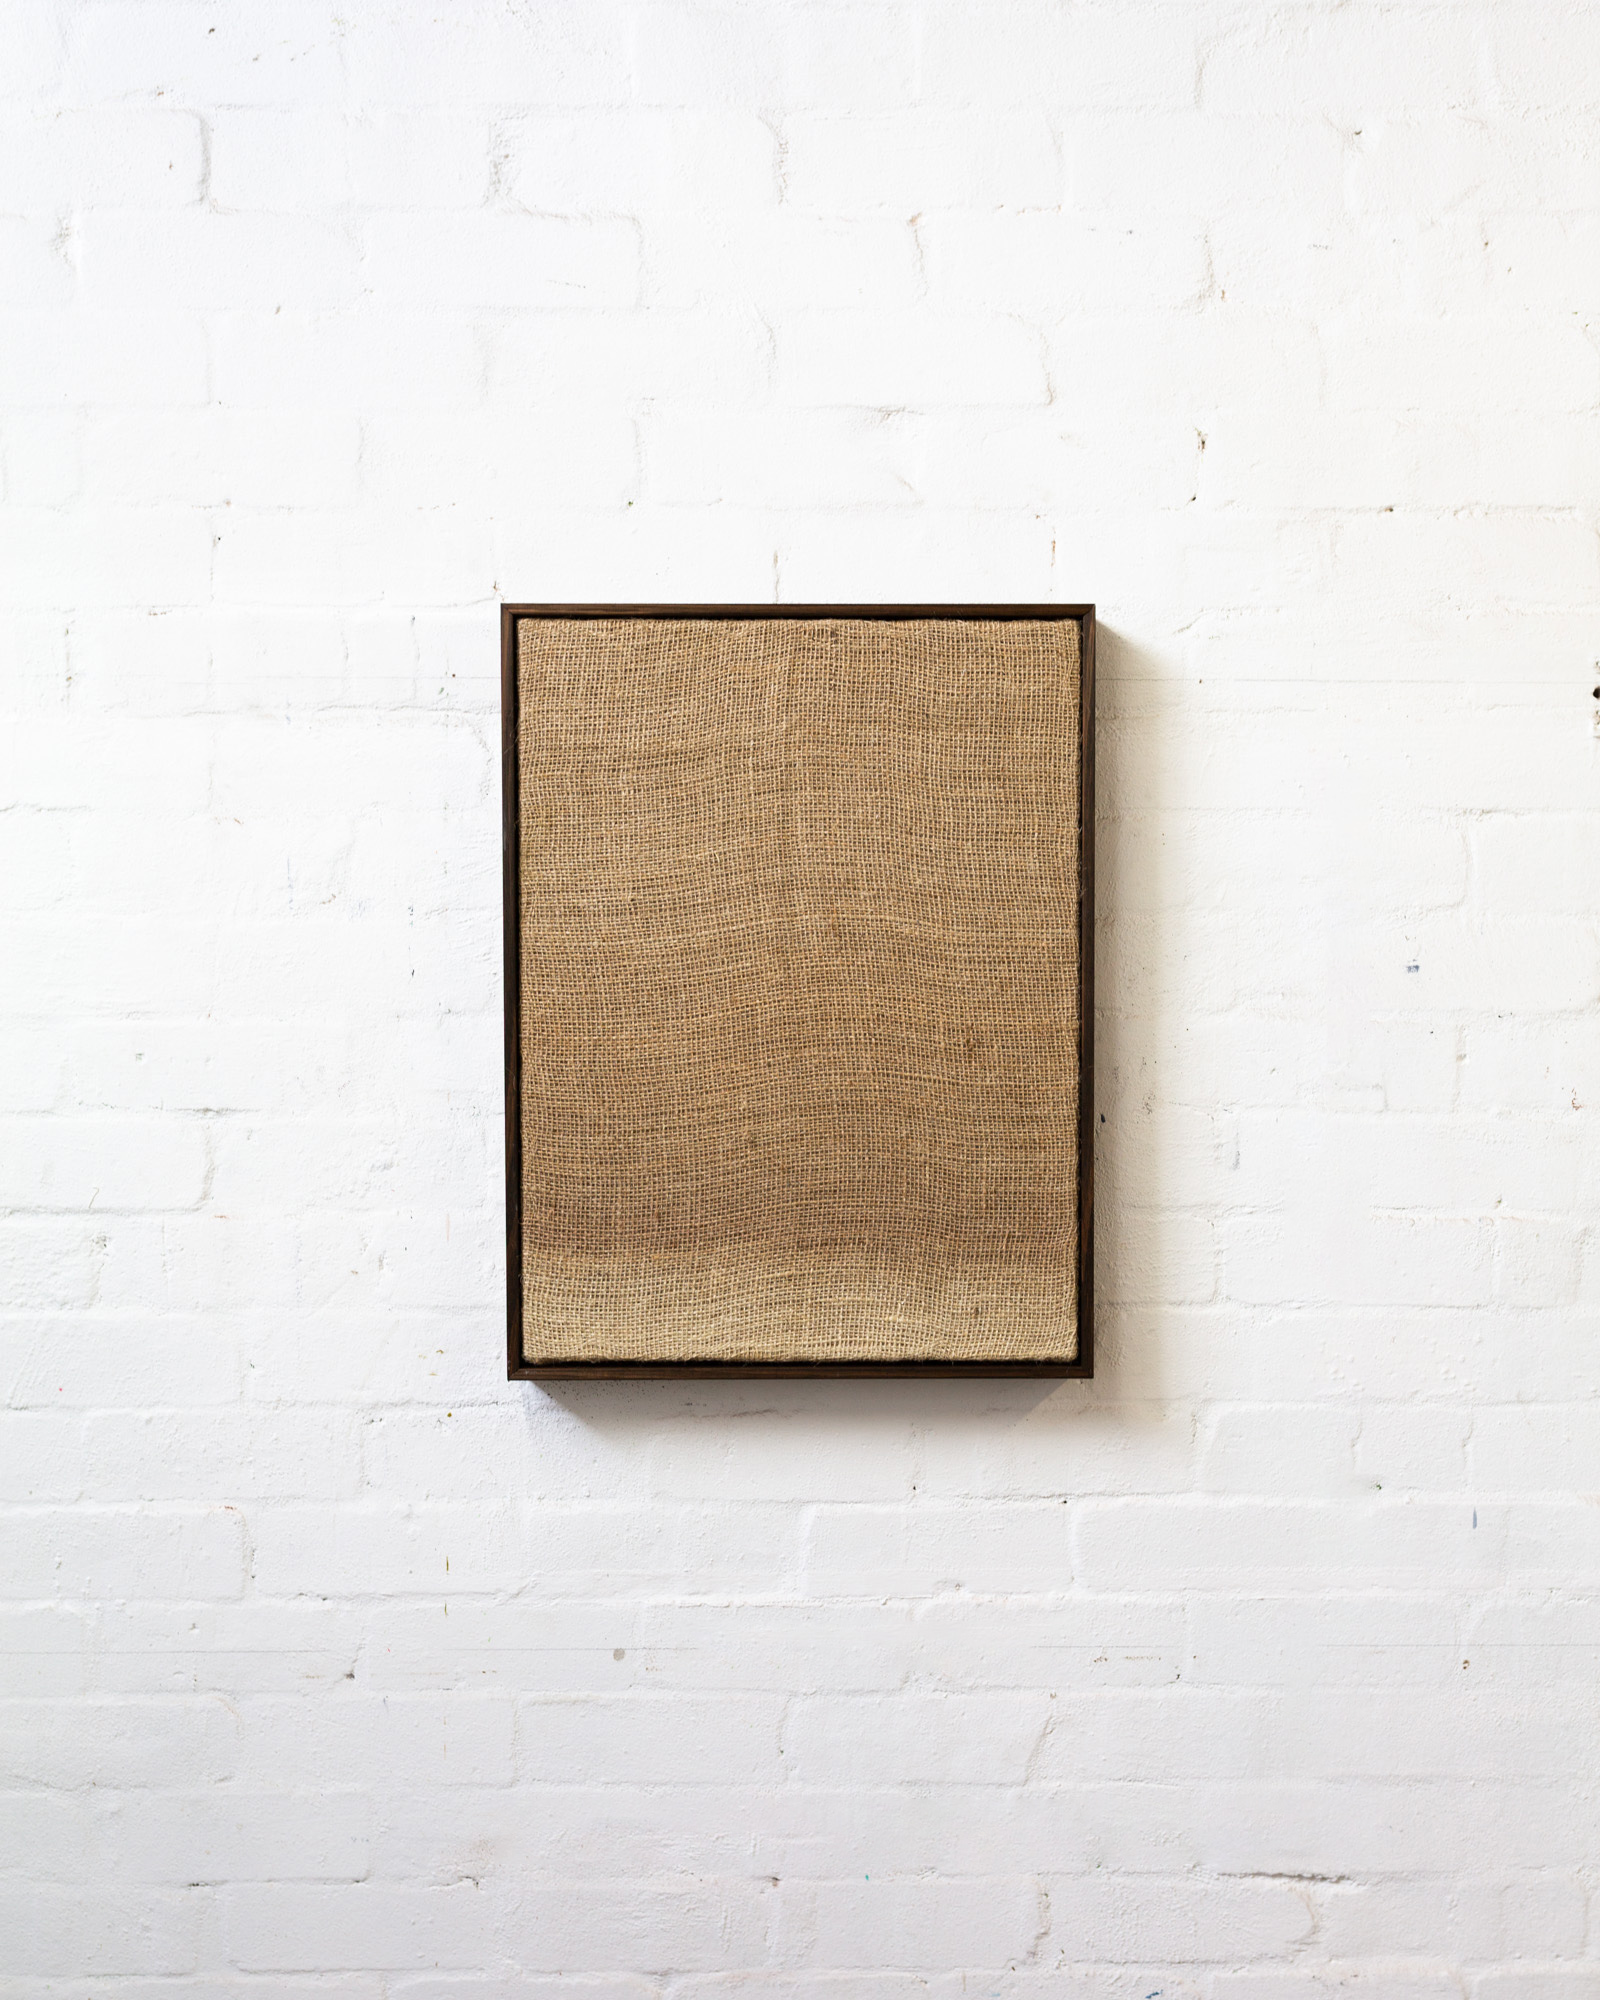 Transfer, 2020, hessian and bleach with artists frame, 61x46x4cm